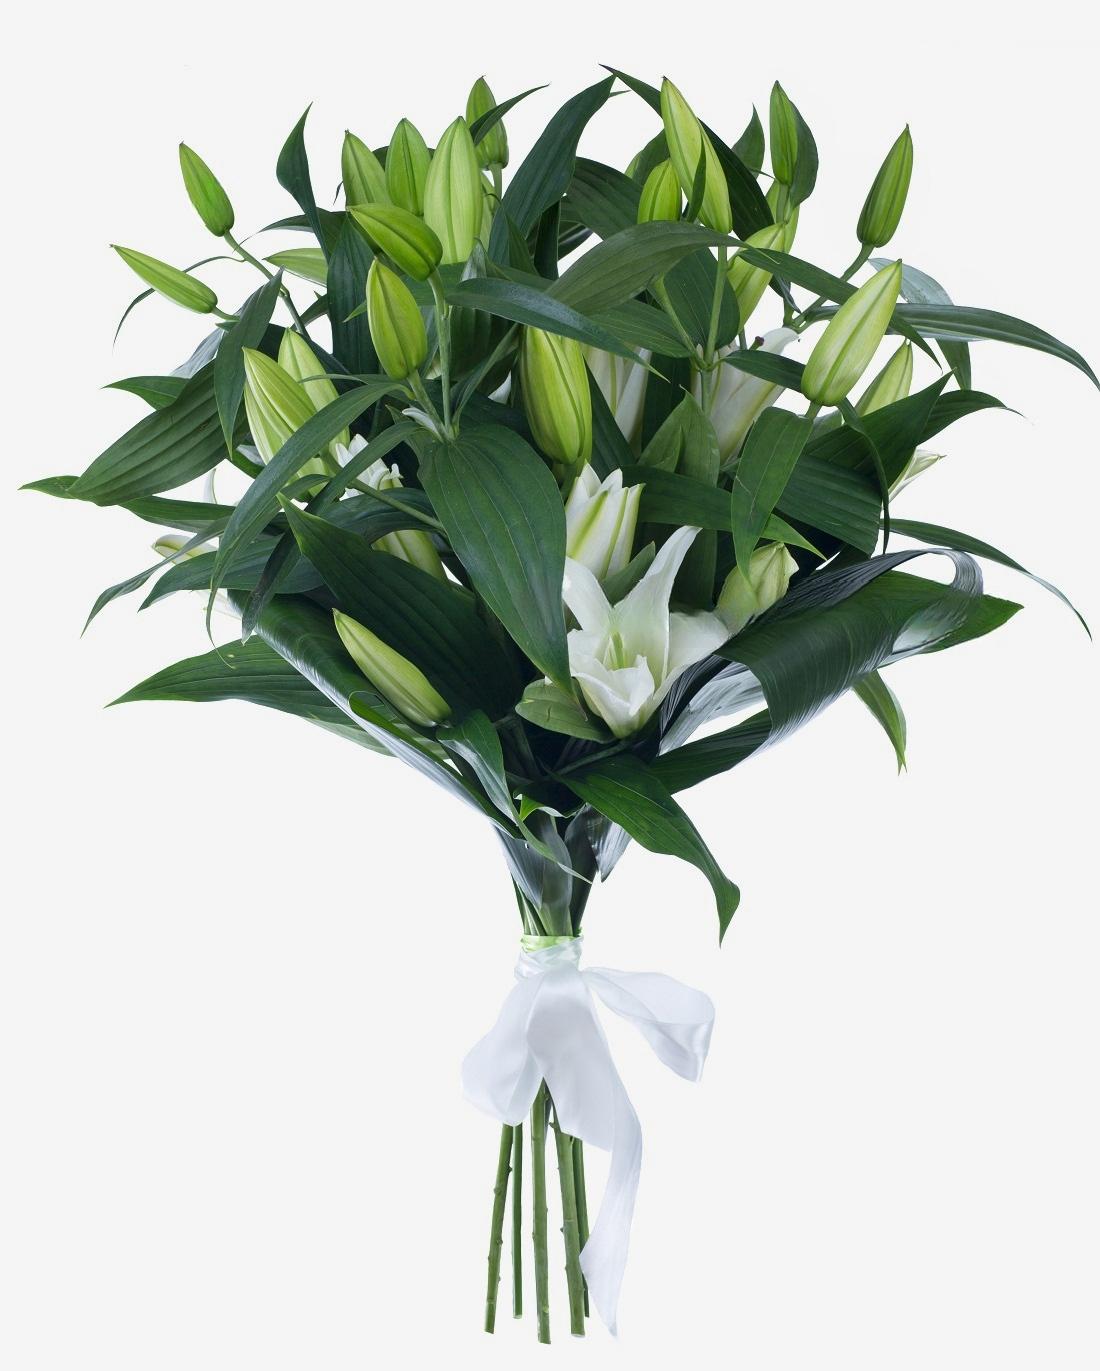 Bouquet of 7 Lilies